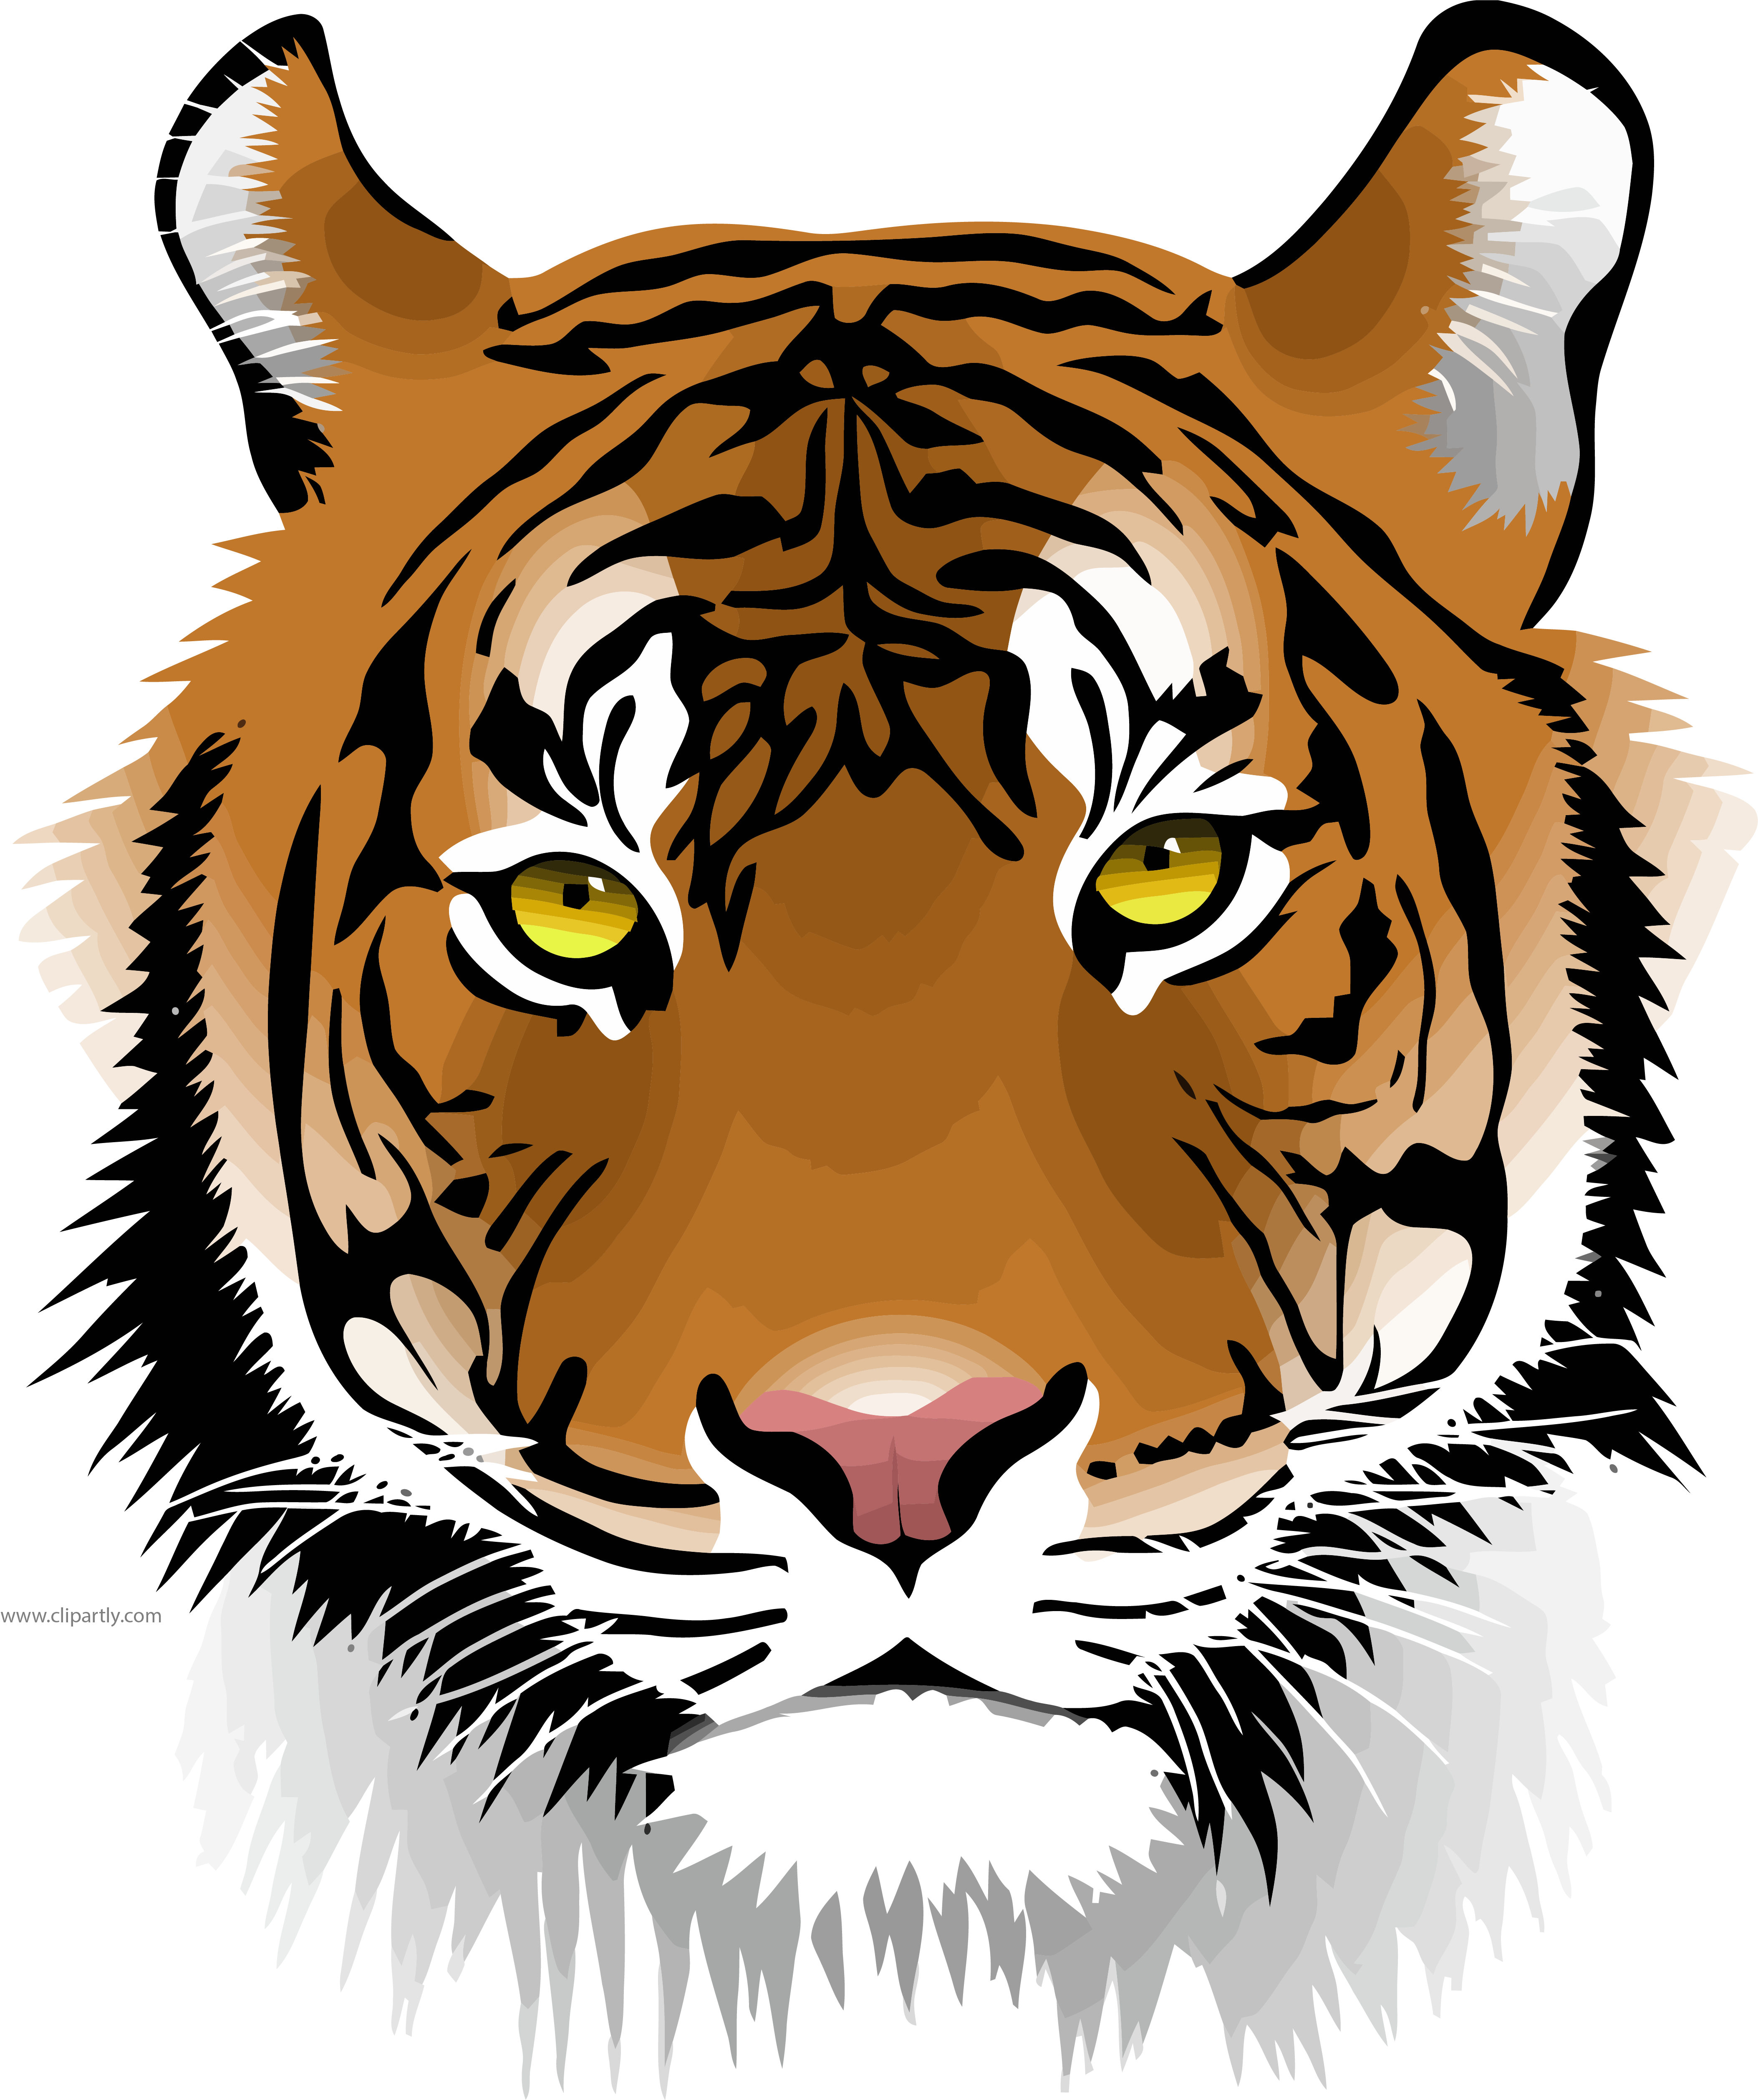 Saber tooth at getdrawings. Hand clipart tiger